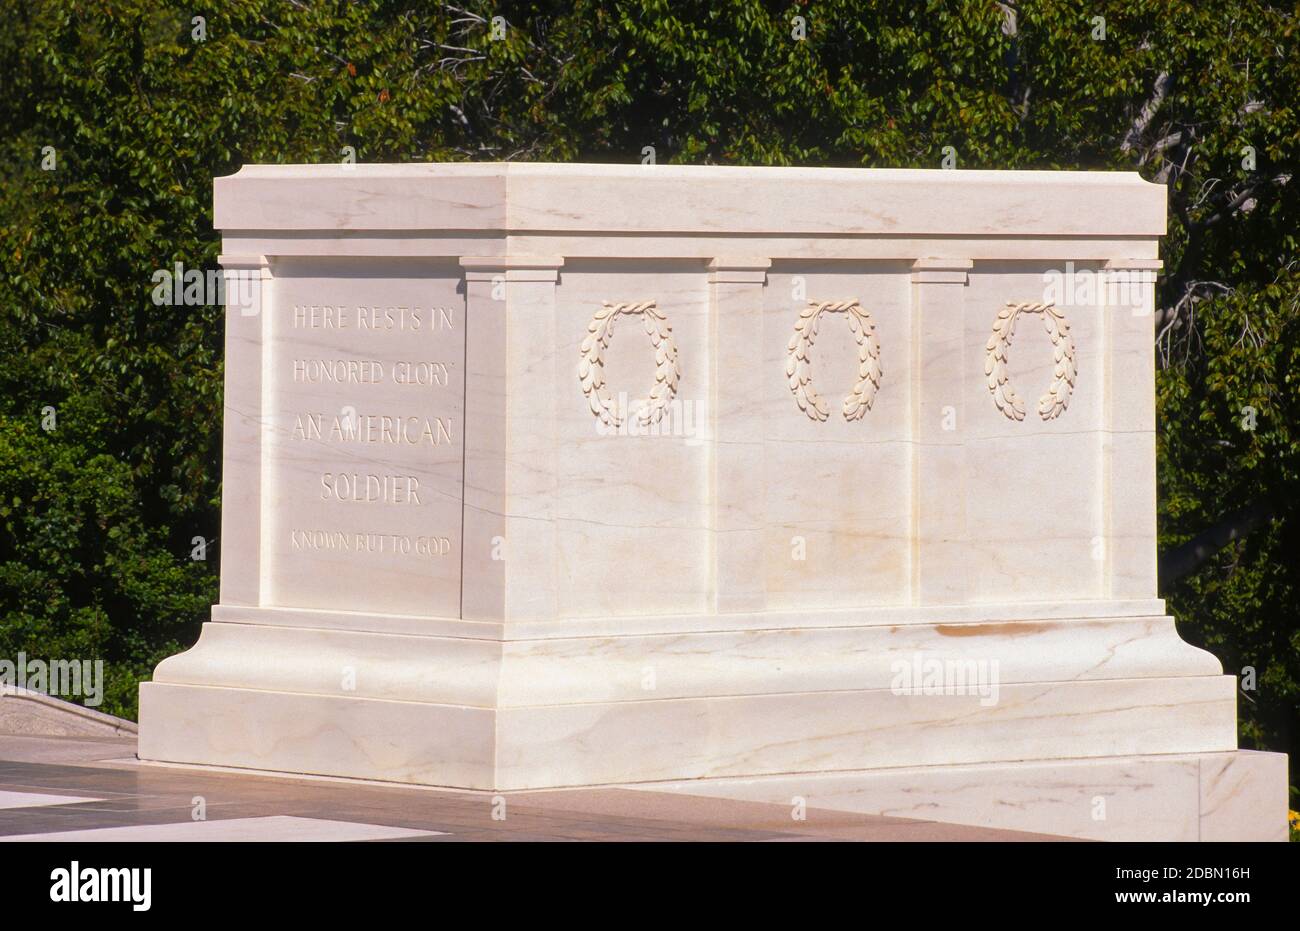 ARLINGTON, VIRGINIA, USA - Tomb of the Unknown Soldier, marble sarcophagus, Arlington National Cemetery. Stock Photo